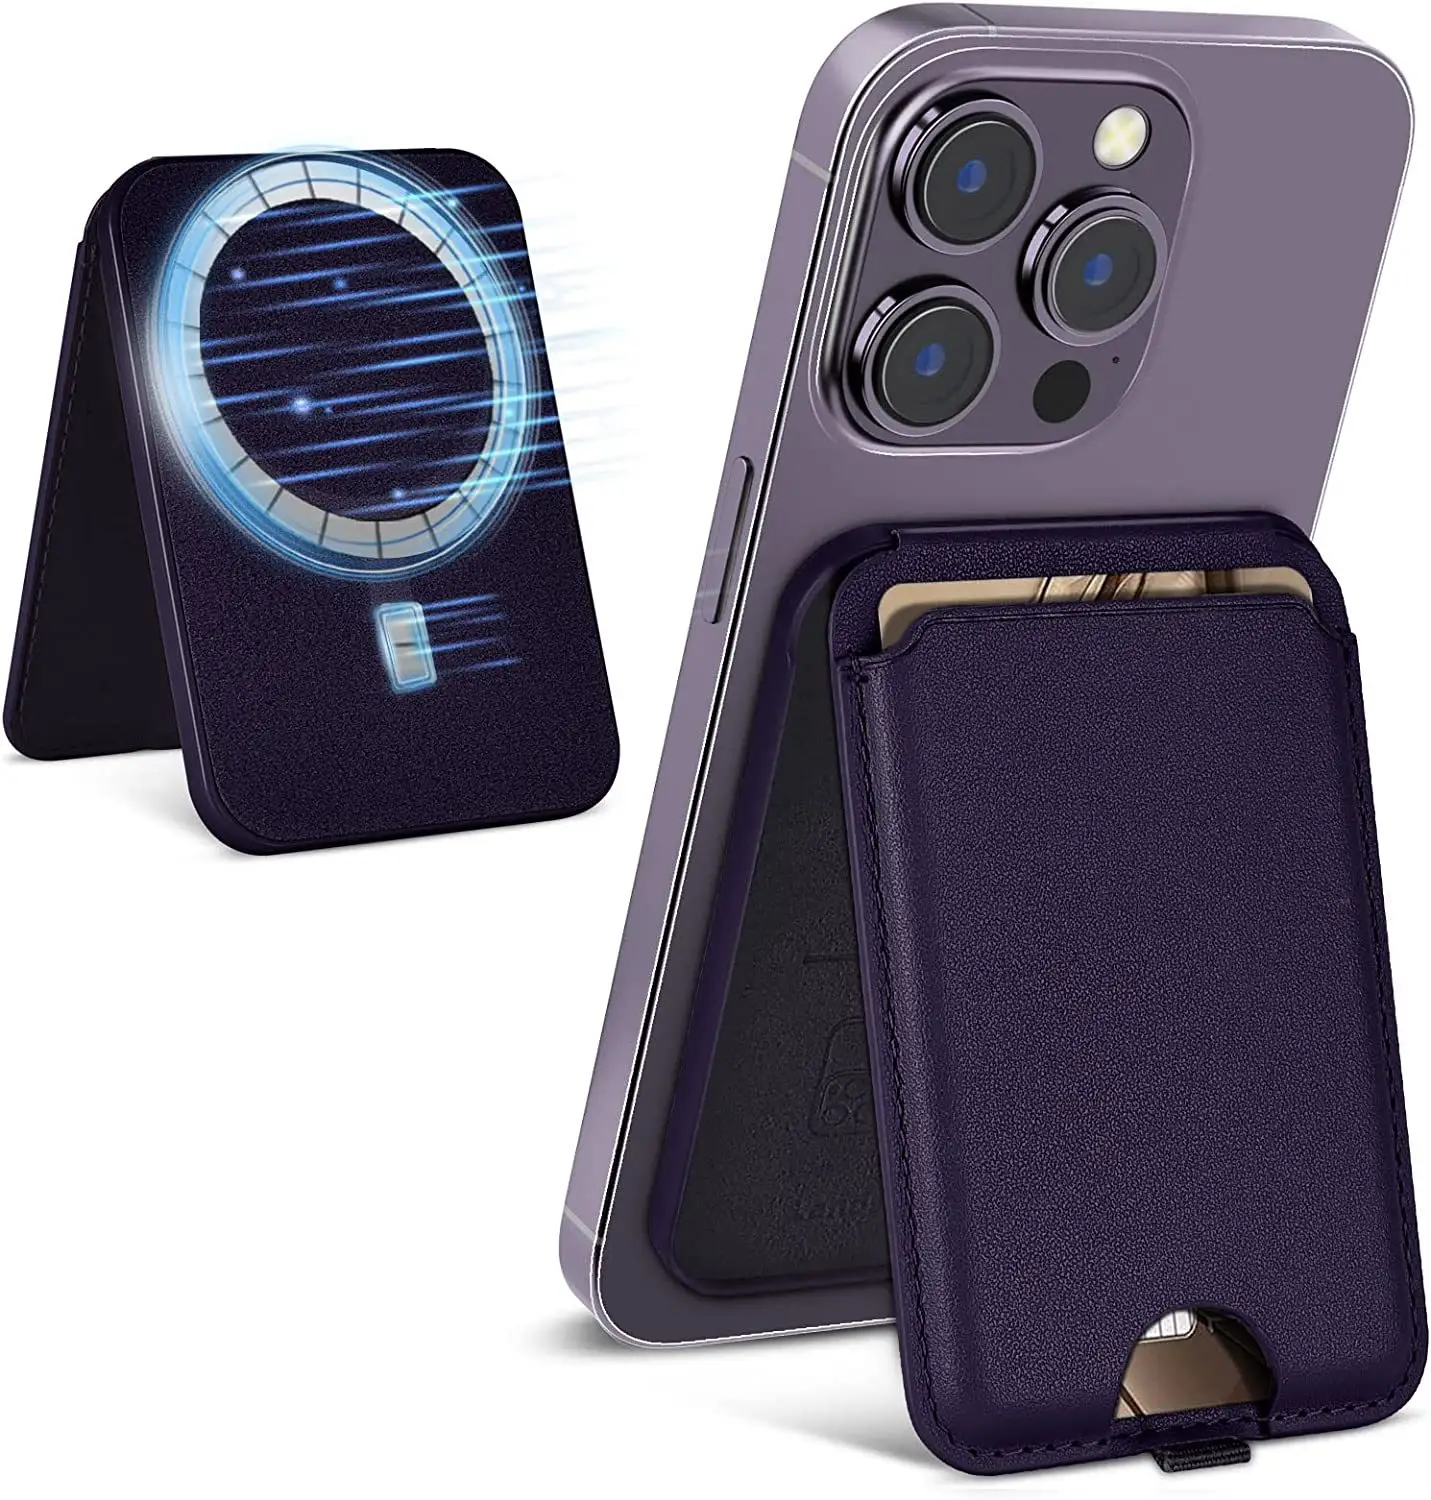 New Arrival Pu Magnetic Mobile Phone Accessories Leather Wallet Magnet Phone Pouch Case For Iphone 11 12 Pro Max